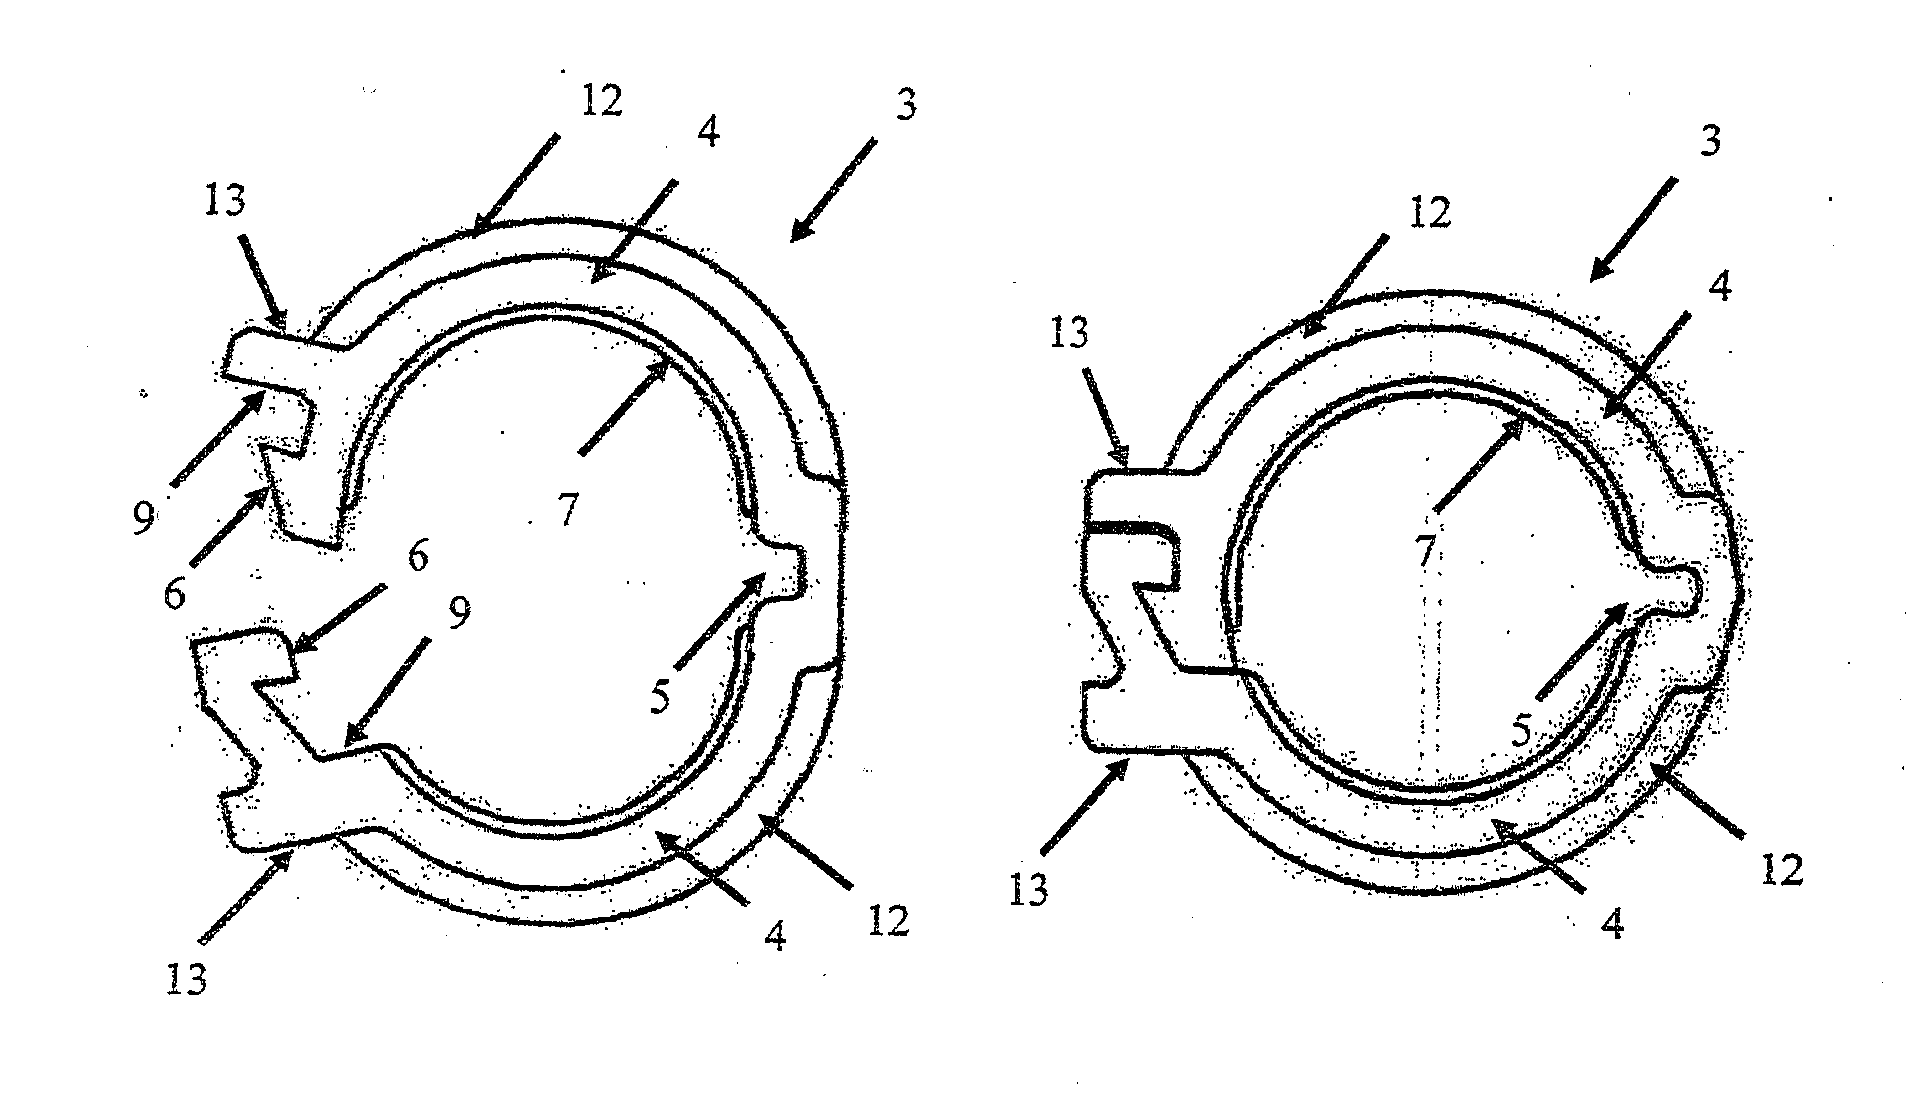 Connection system for connecting pex tubing to a fitting which includes a clamp